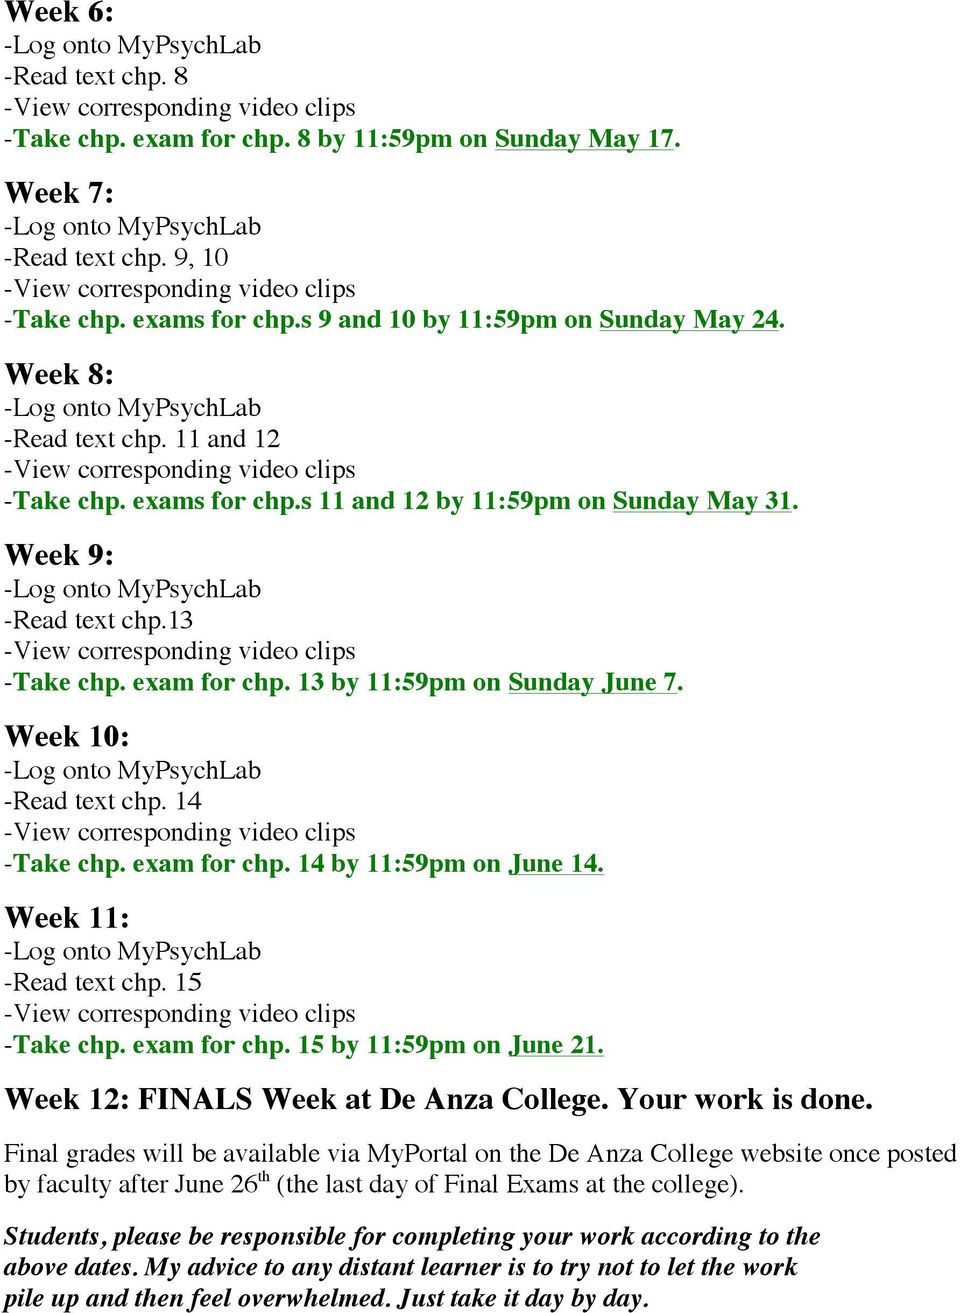 exam for chp. 14 by 11:59pm on June 14. Week 11: -Read text chp. 15 -Take chp. exam for chp. 15 by 11:59pm on June 21. Week 12: FINALS Week at De Anza College. Your work is done.